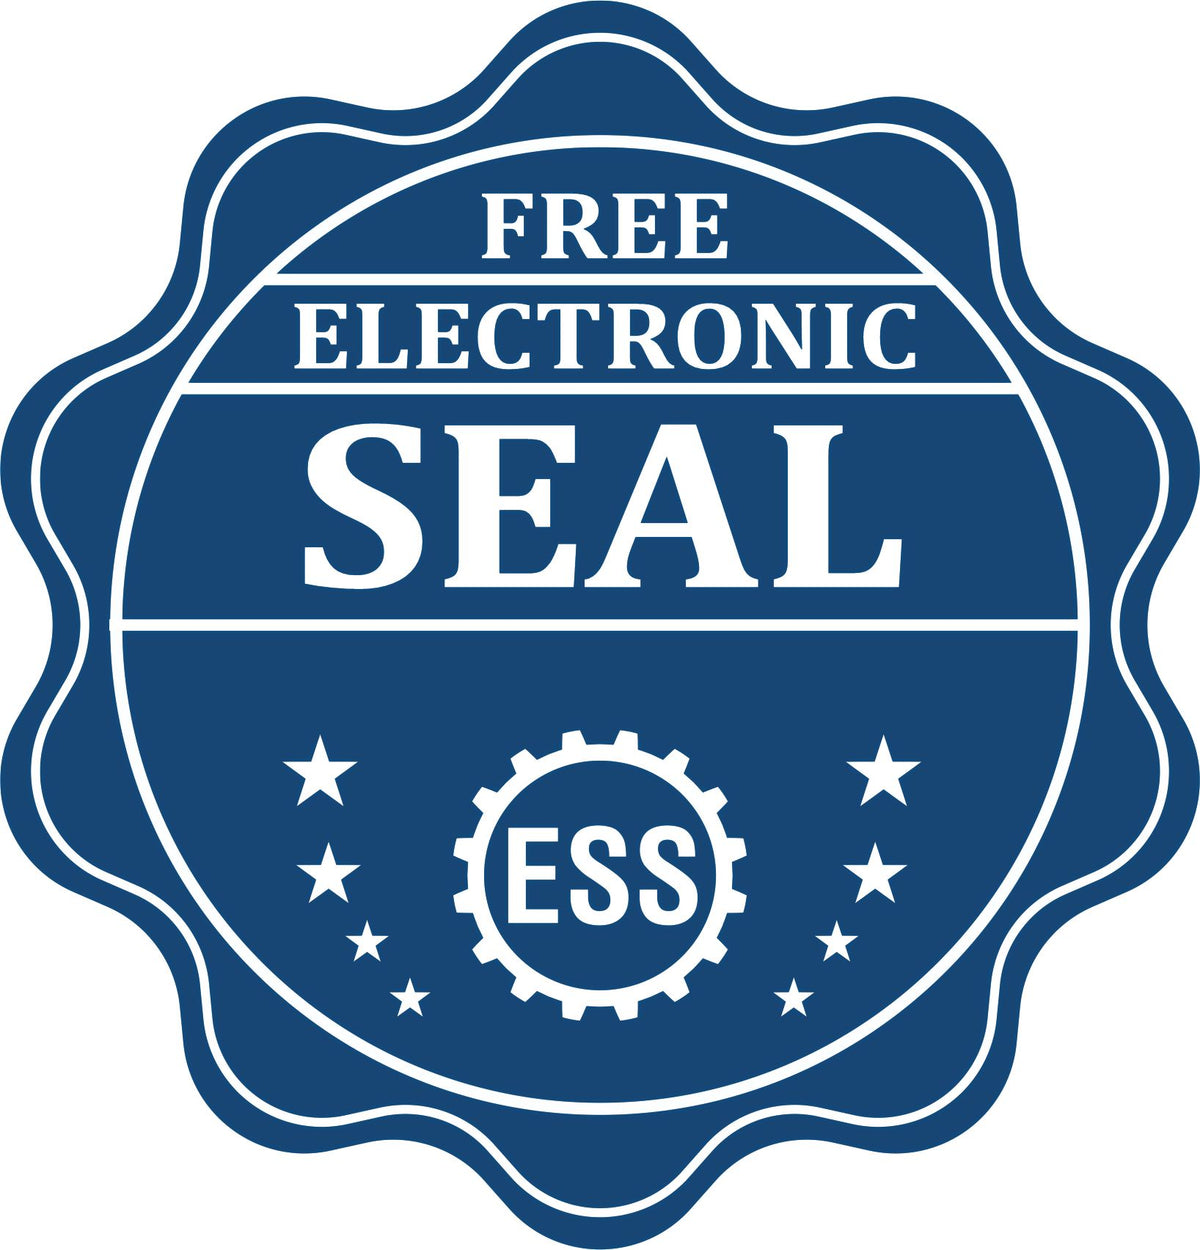 A badge showing a free electronic seal for the State of Utah Extended Long Reach Engineer Seal with stars and the ESS gear on the emblem.